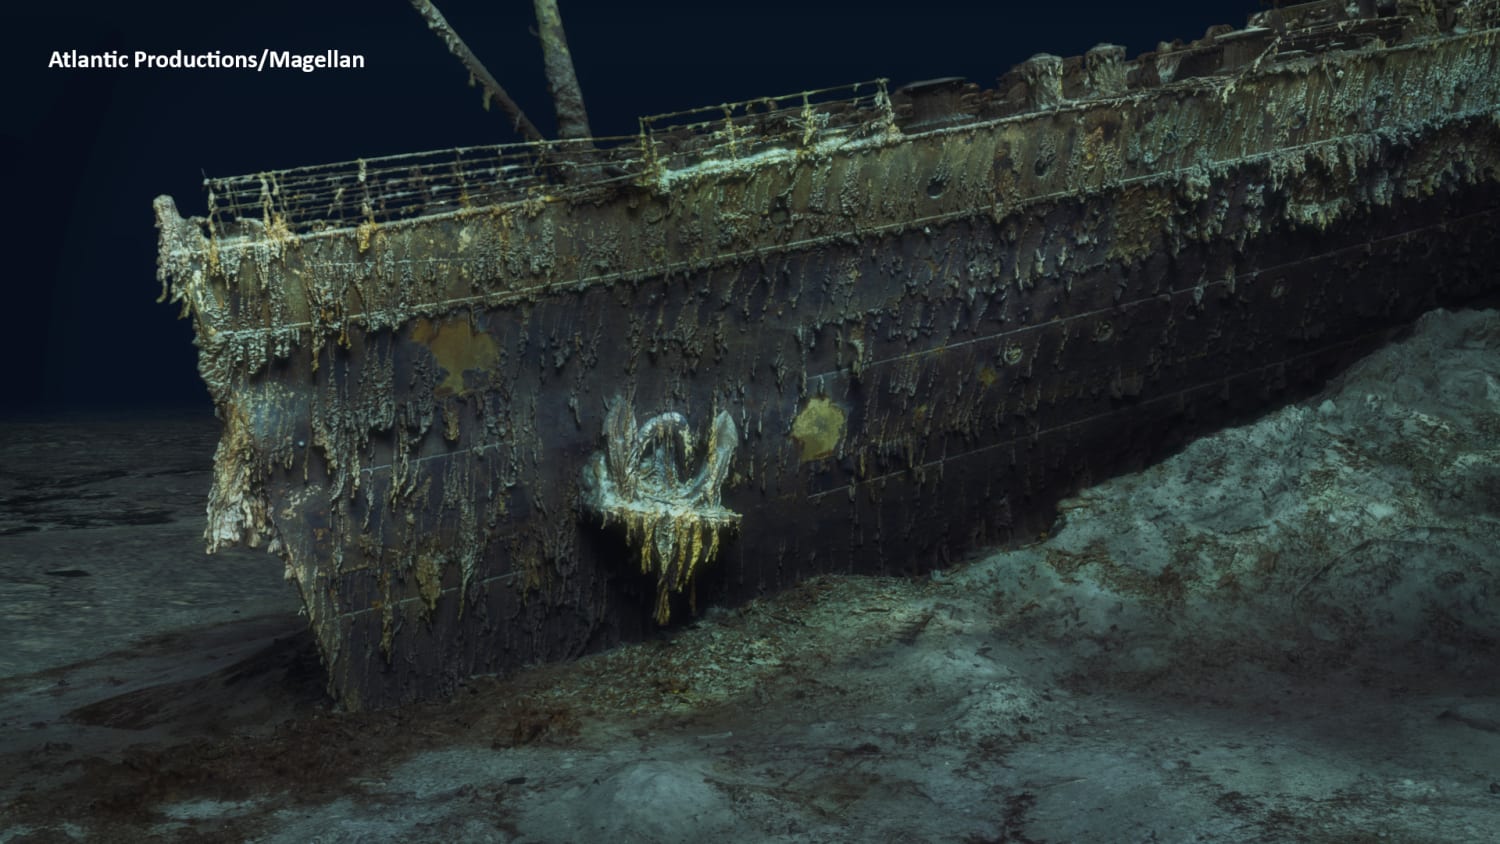 First full-size scan reveals Titanic wreck as never seen before